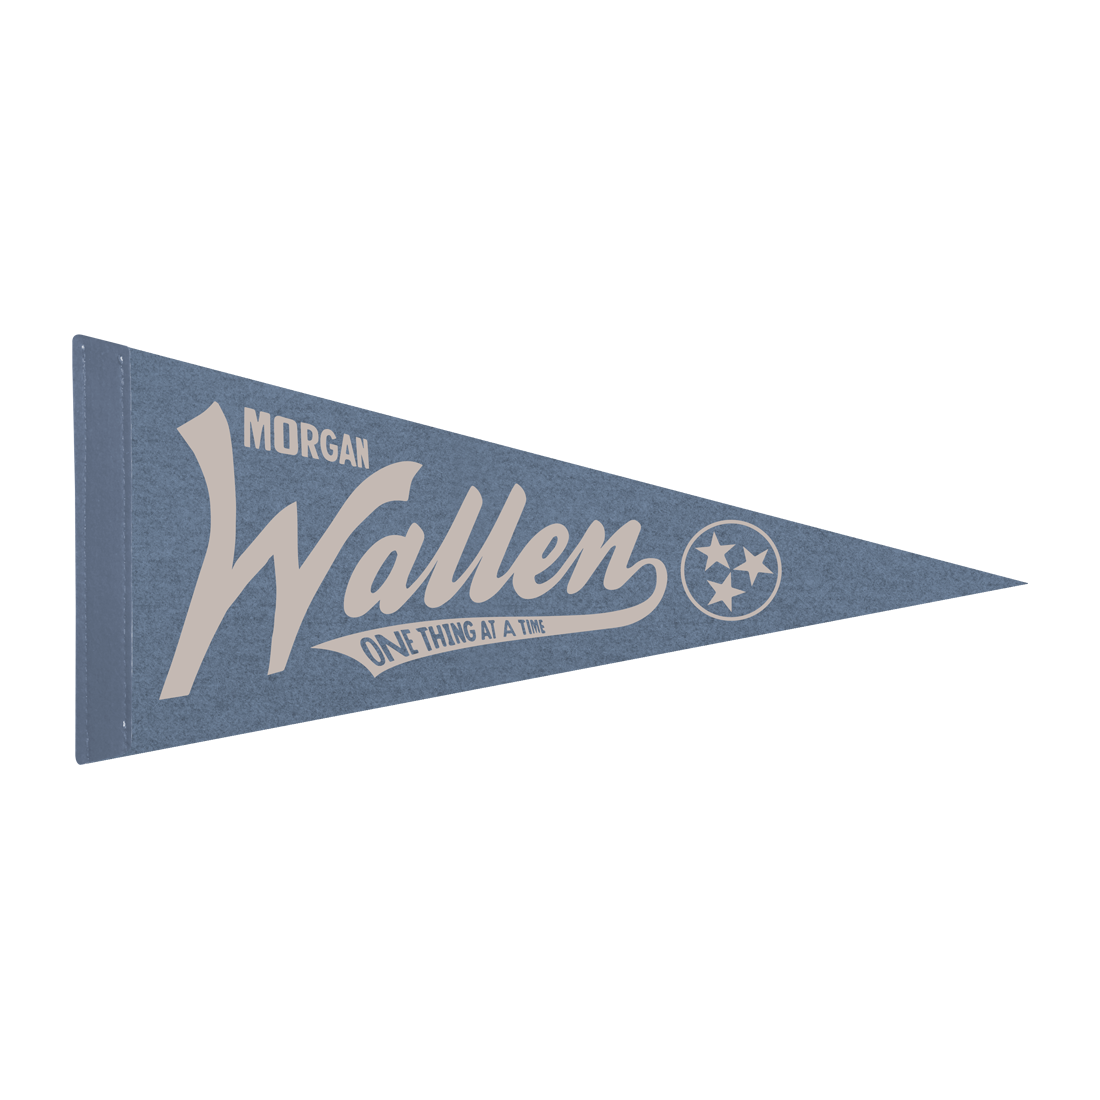 Morgan Wallen - One Thing At A Time Blue Pennant Flag